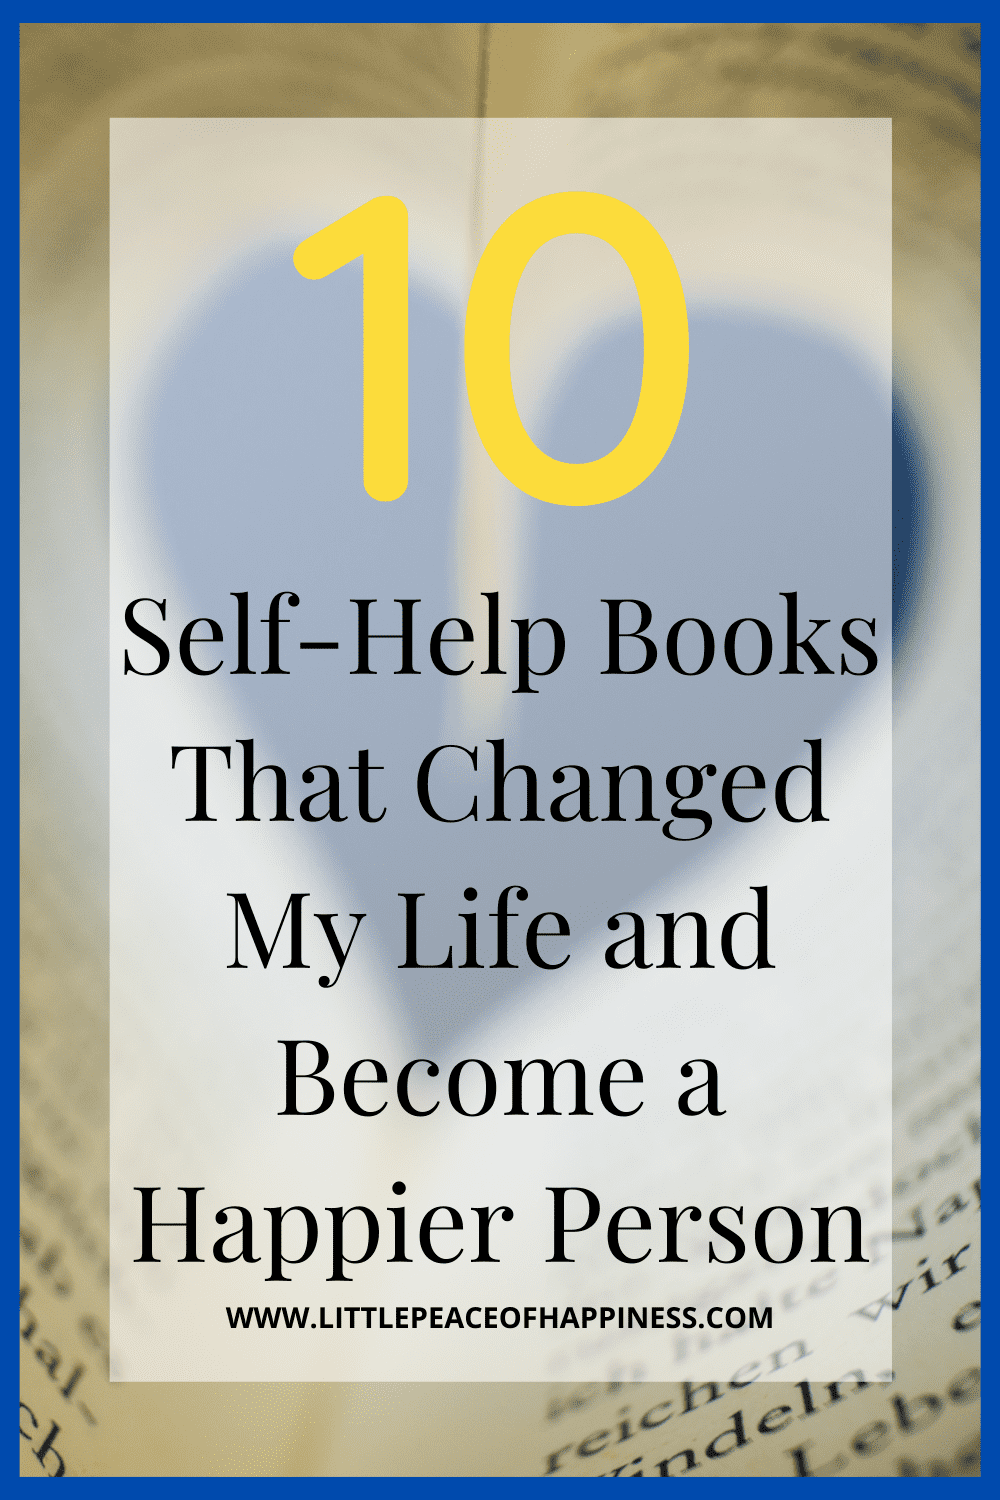 Self-Help Books to be Happy